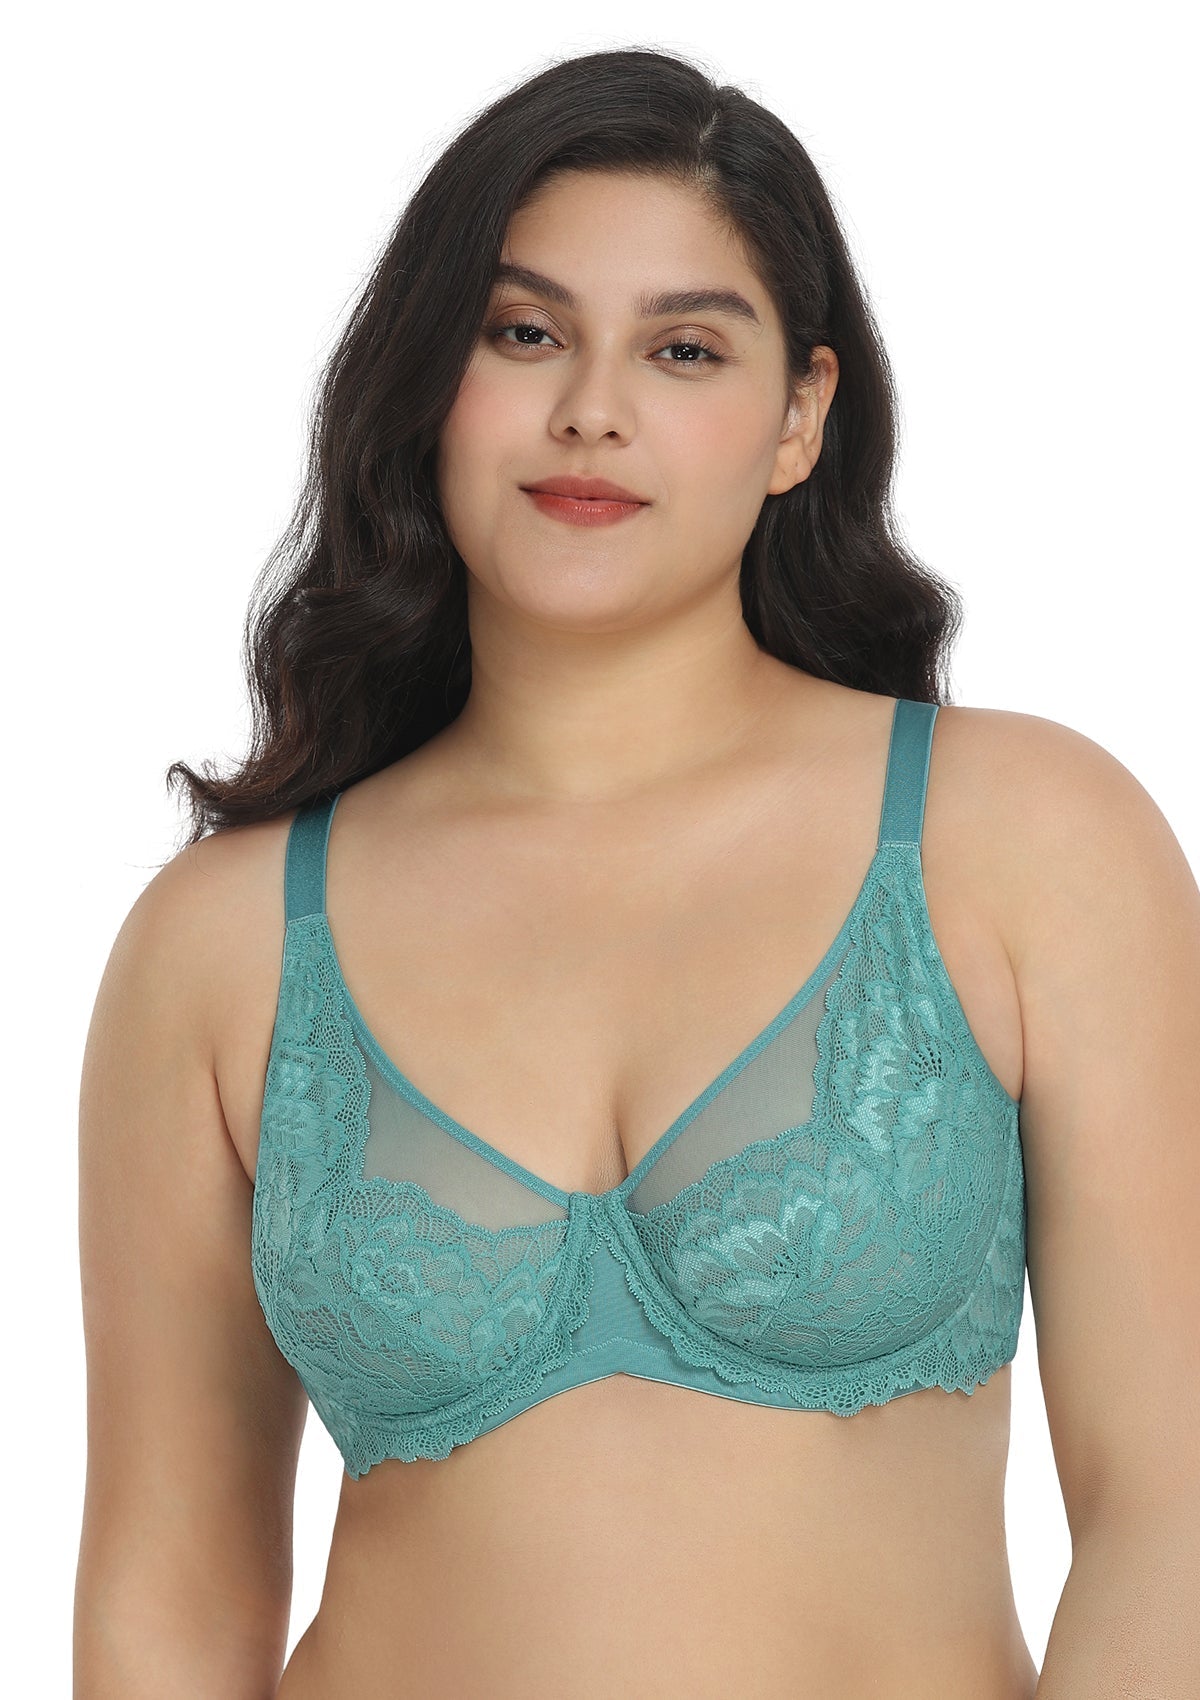 HSIA Paeonia Lace Full Coverage Underwire Non-Padded Uplifting Bra - Teal / 36 / D